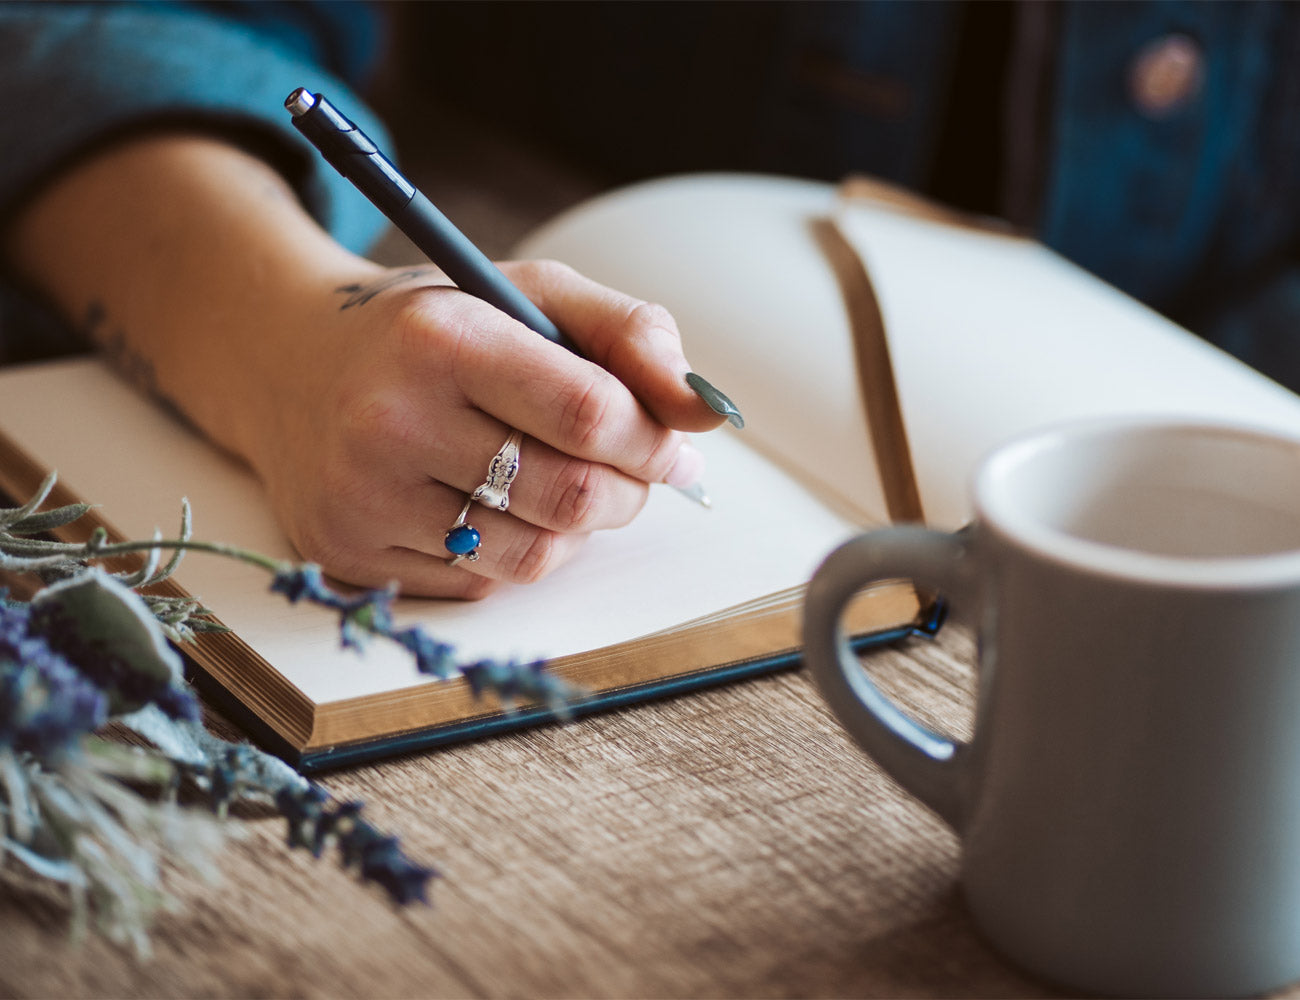 Mindful Journaling - Writing Your Way to Wellness